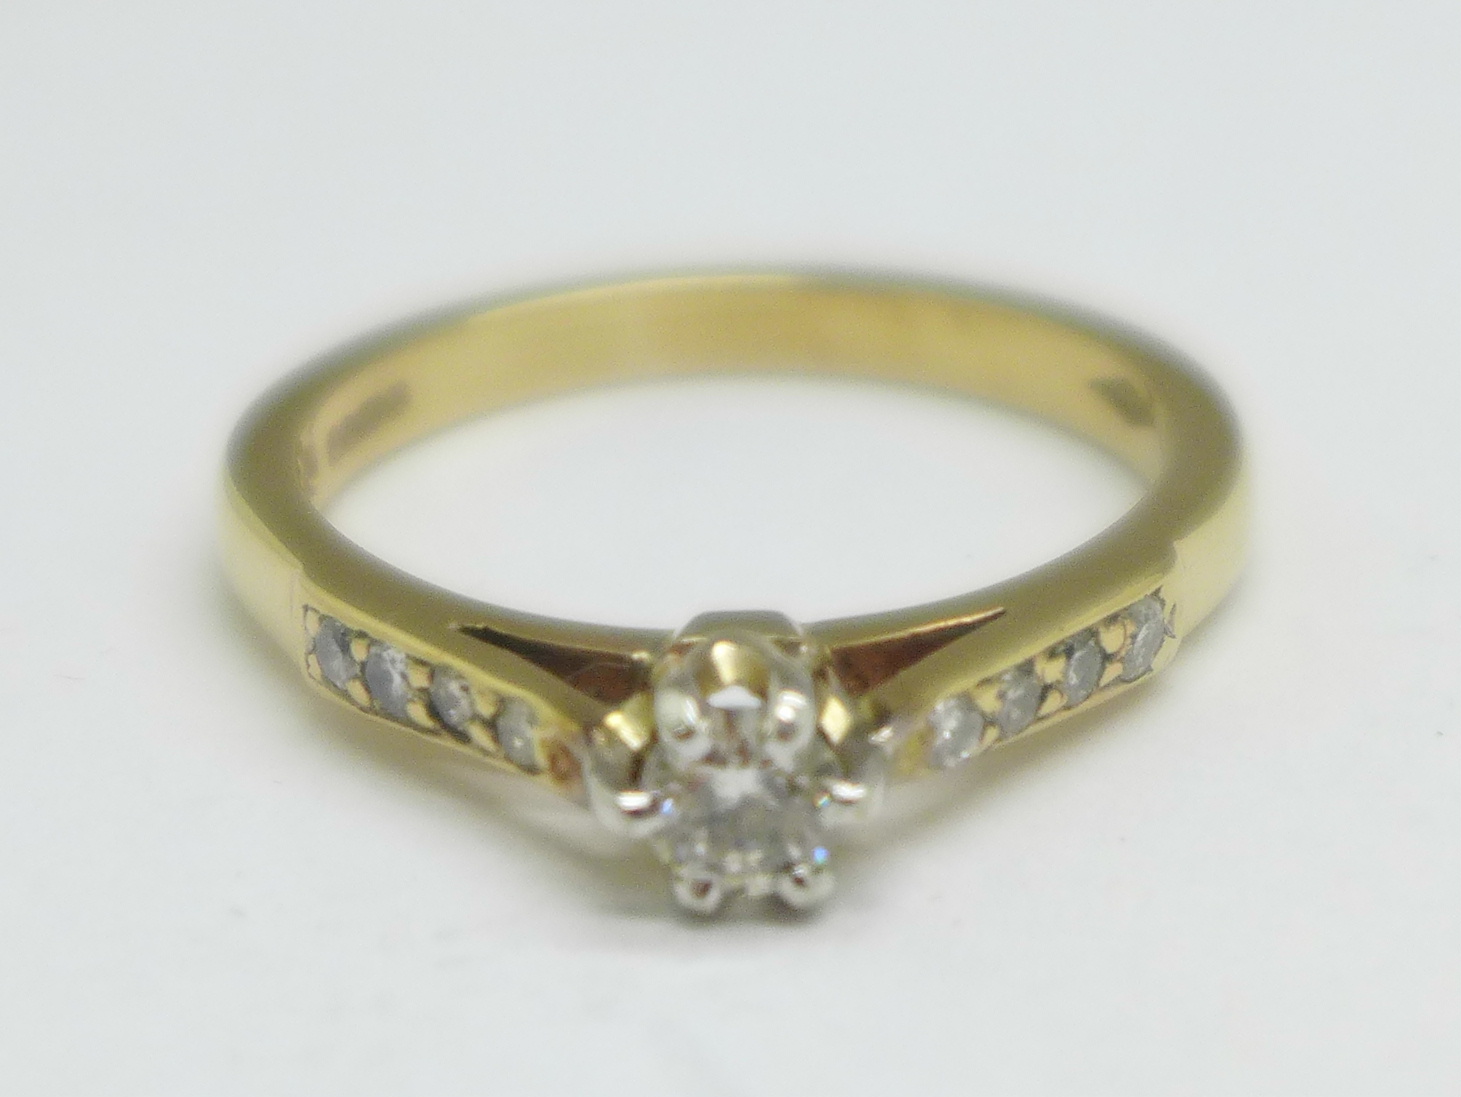 A 9ct gold and nine stone diamond ring, 3g, P, main stone approximately 0.25carat weight